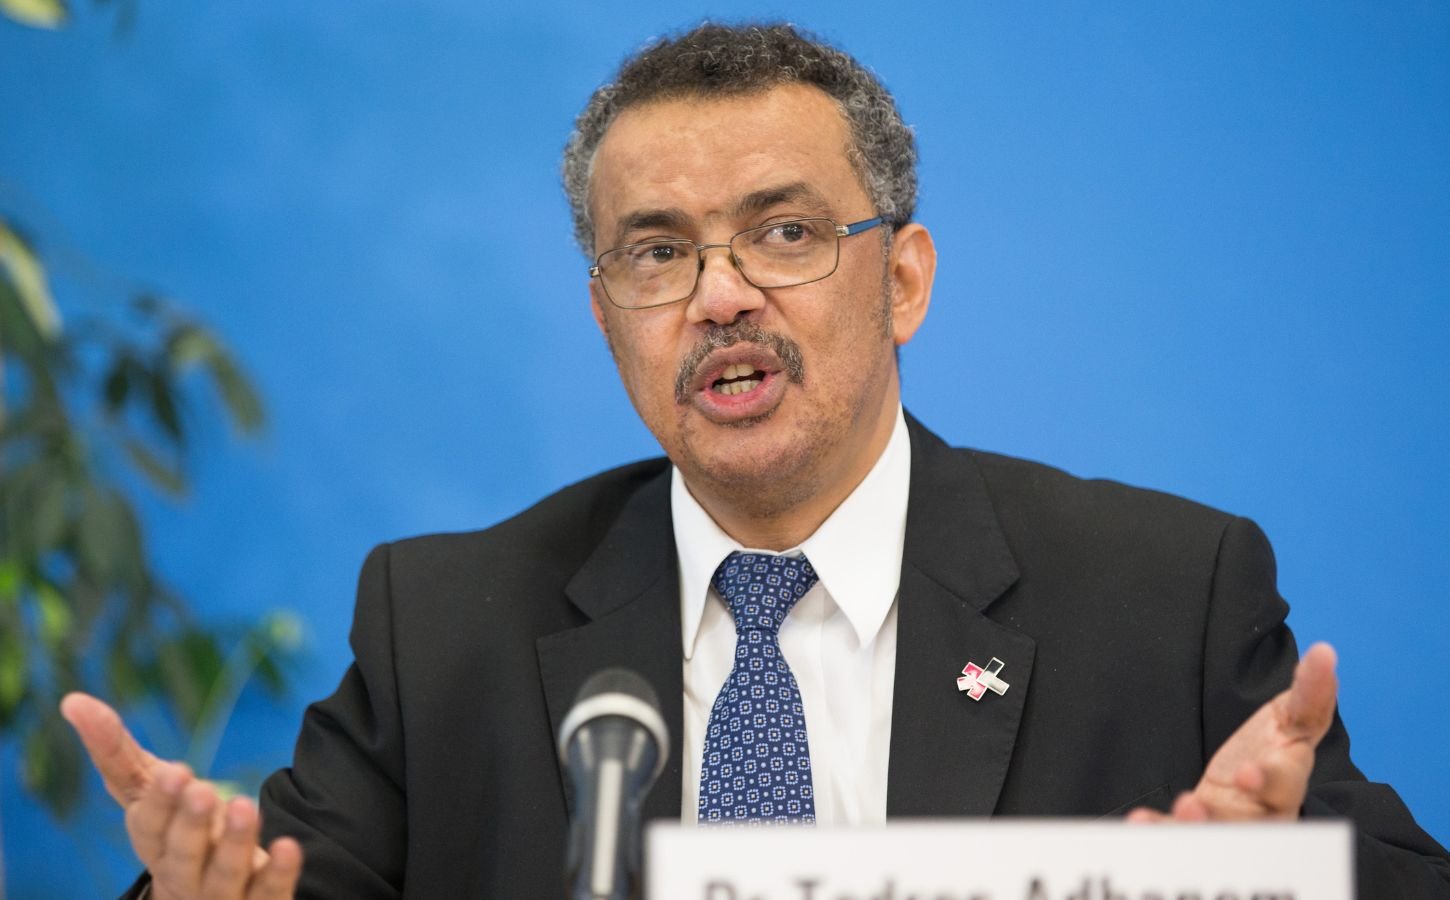 Photo shows WHO Director-General Dr Tedros Adhanom Ghebreyesus, who has previously called for a shift towards plant-based diets